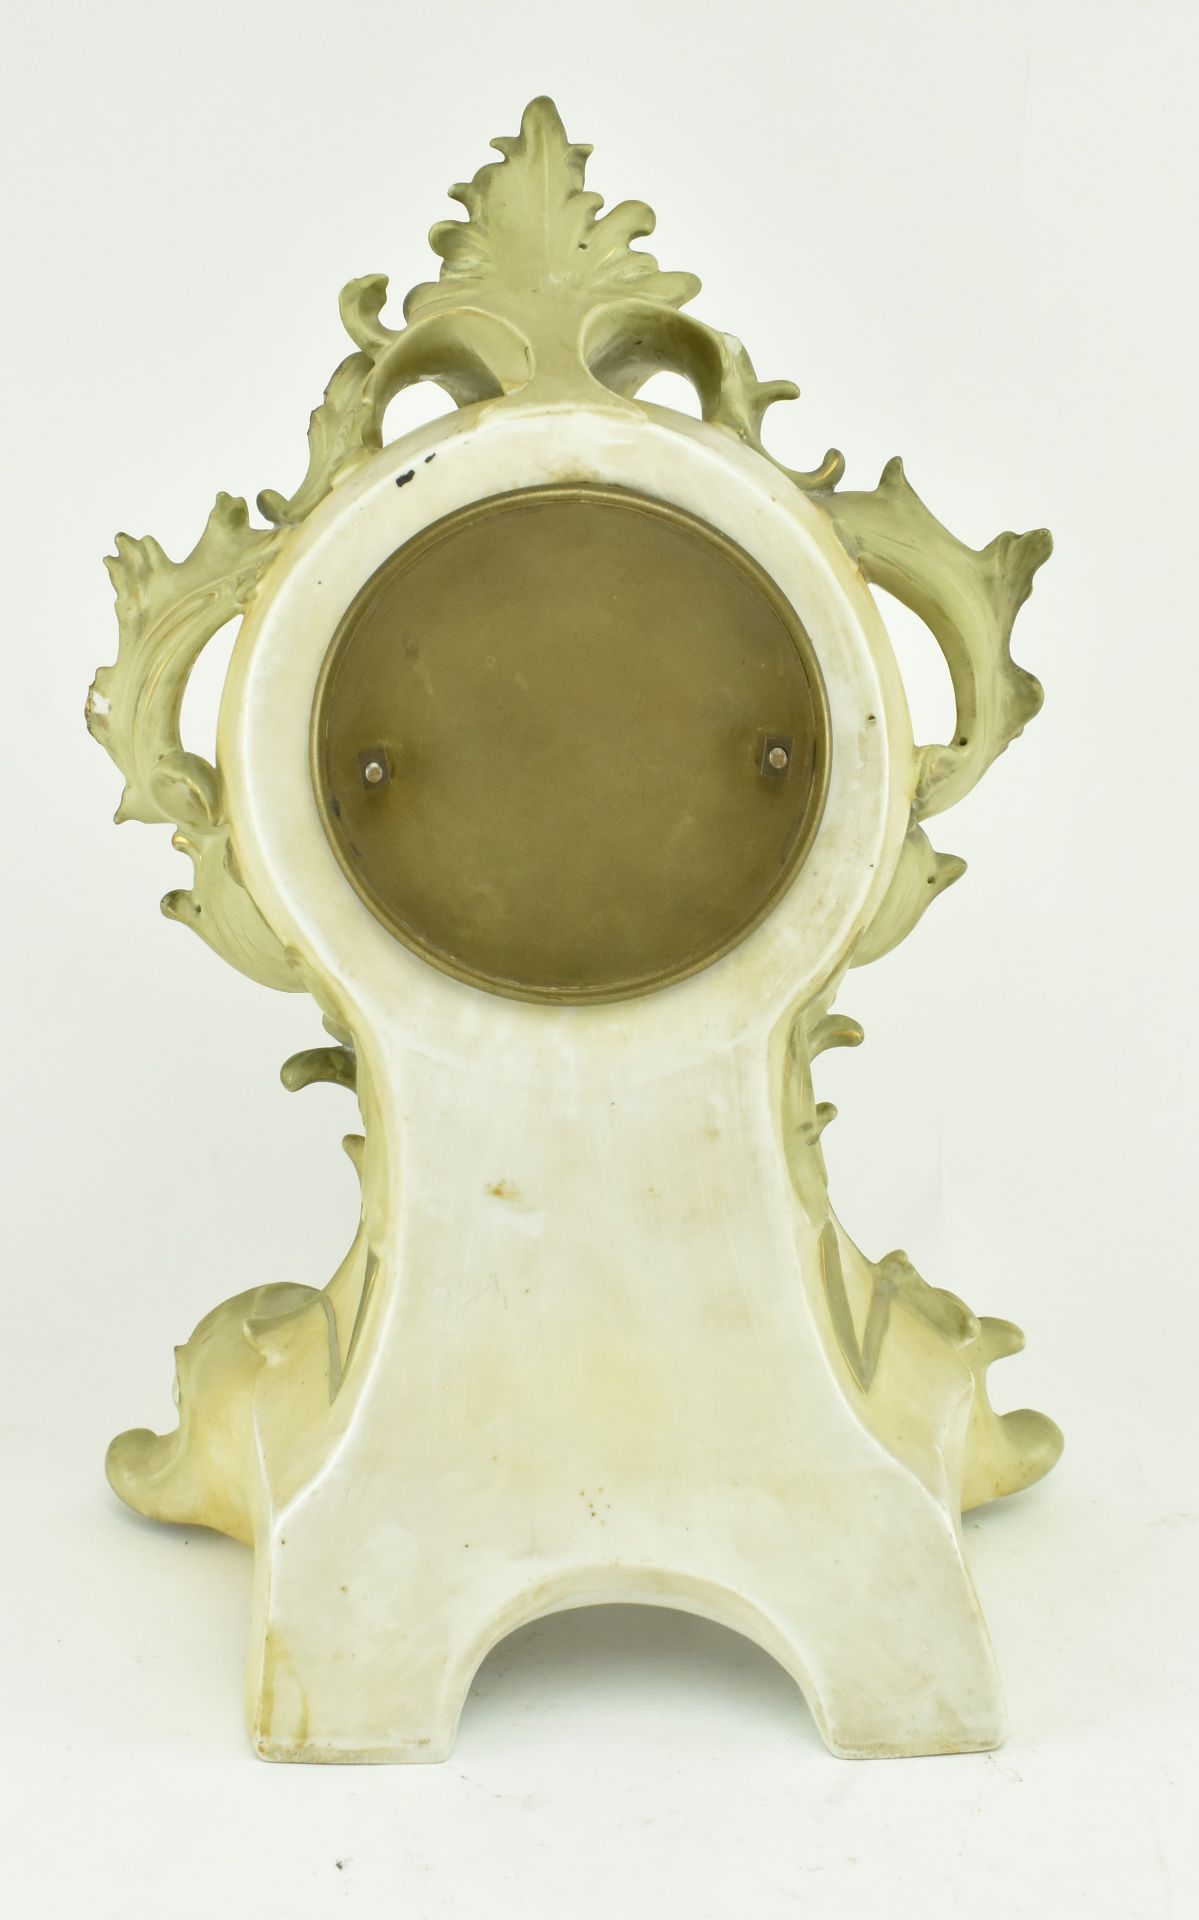 19TH CENTURY CONTINENTAL BISQUE PORCELAIN MANTLE CLOCK - Image 8 of 10